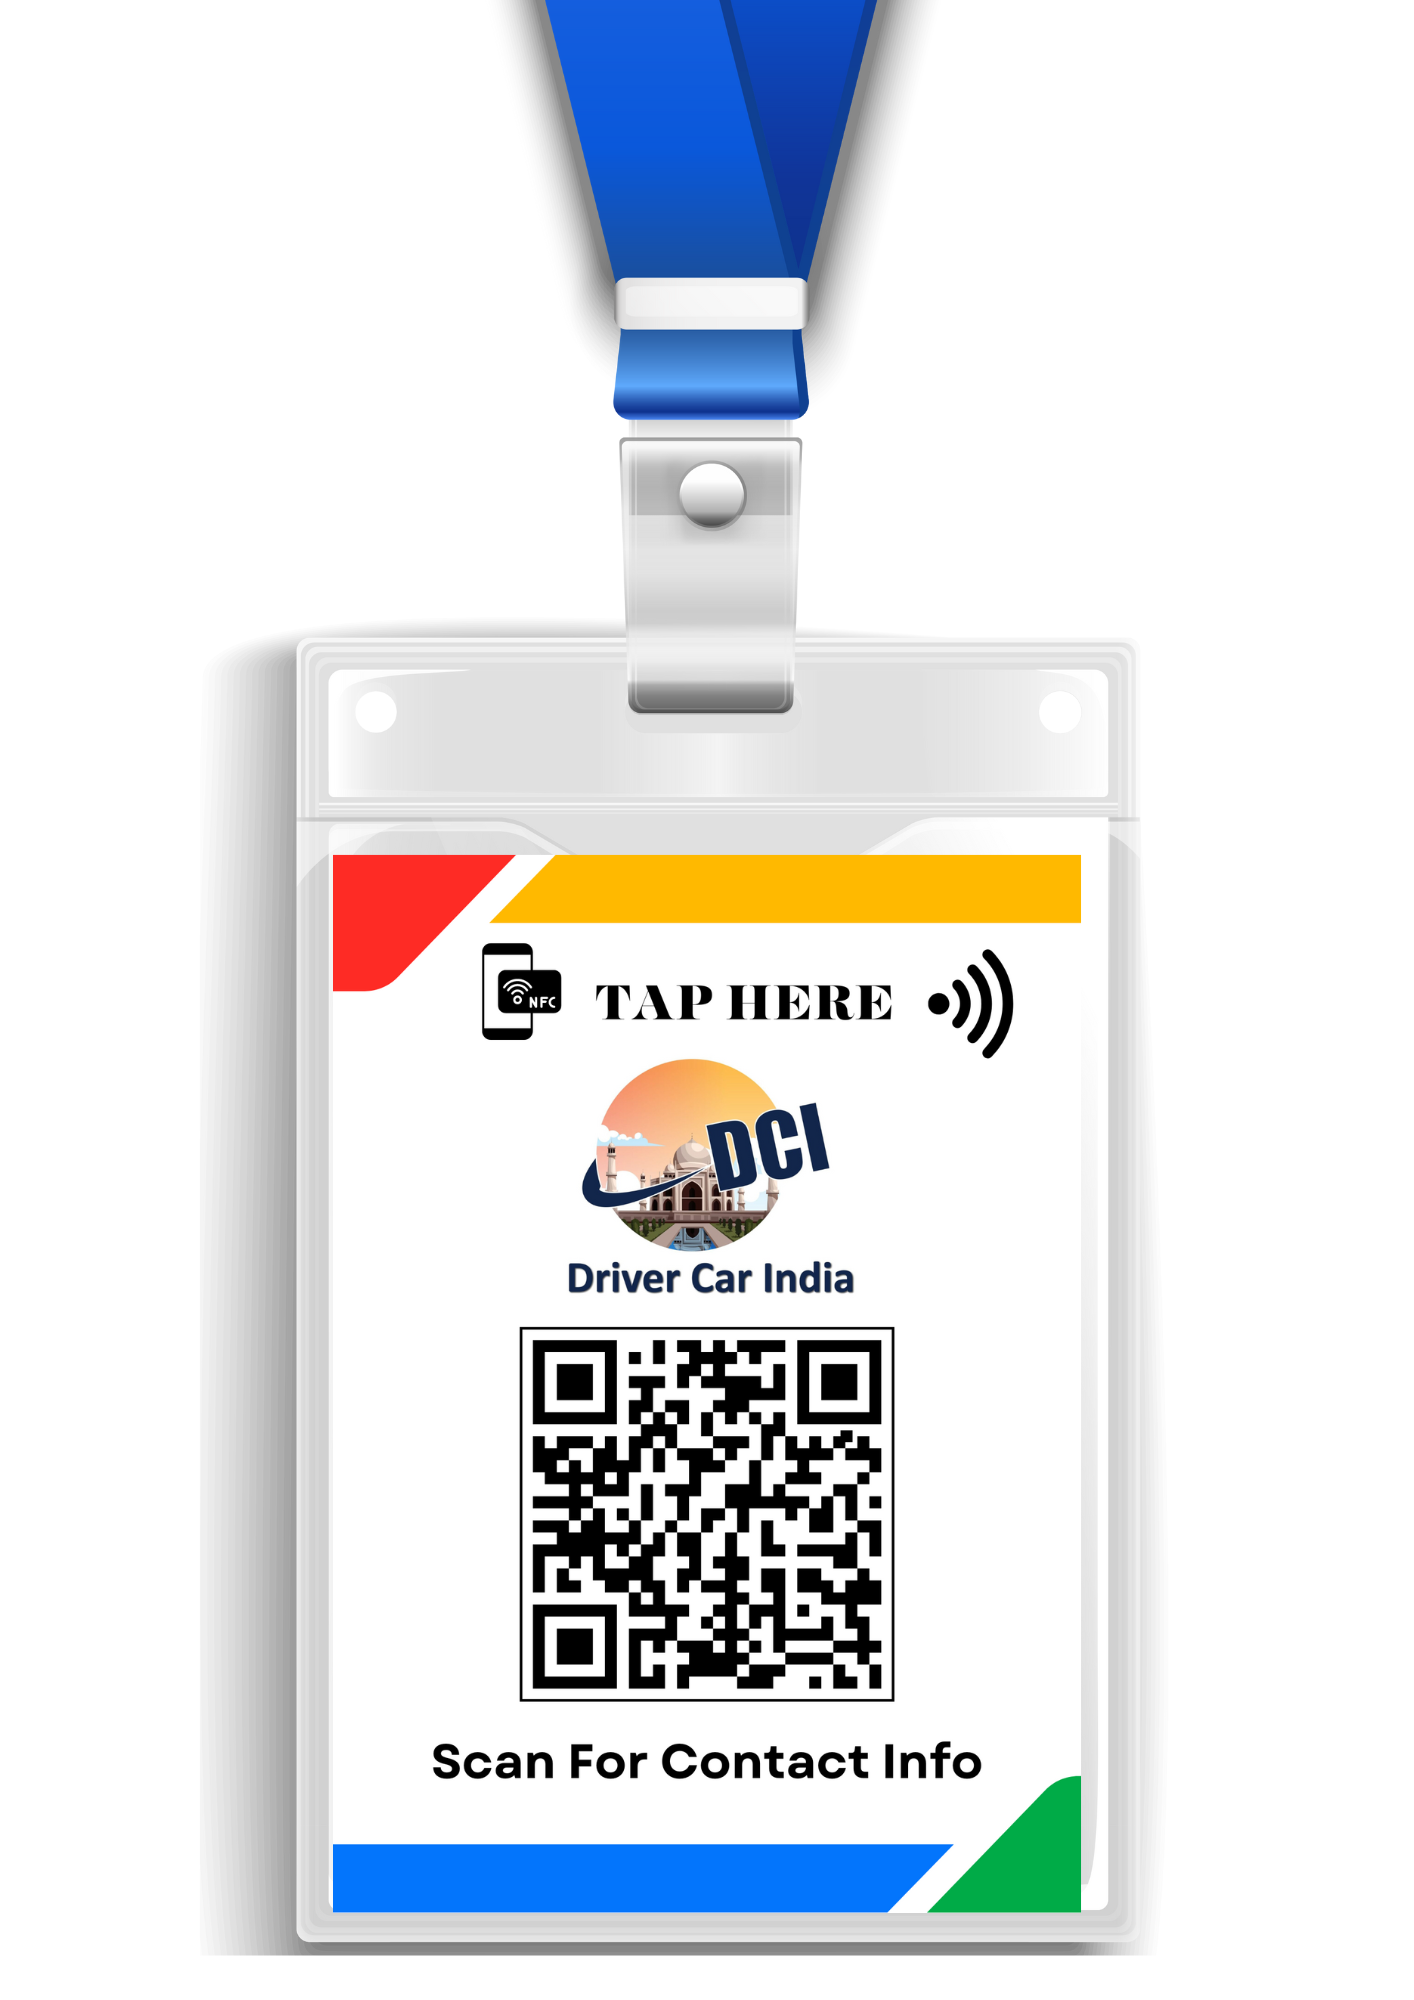 NFC business card with QR code for driver car india